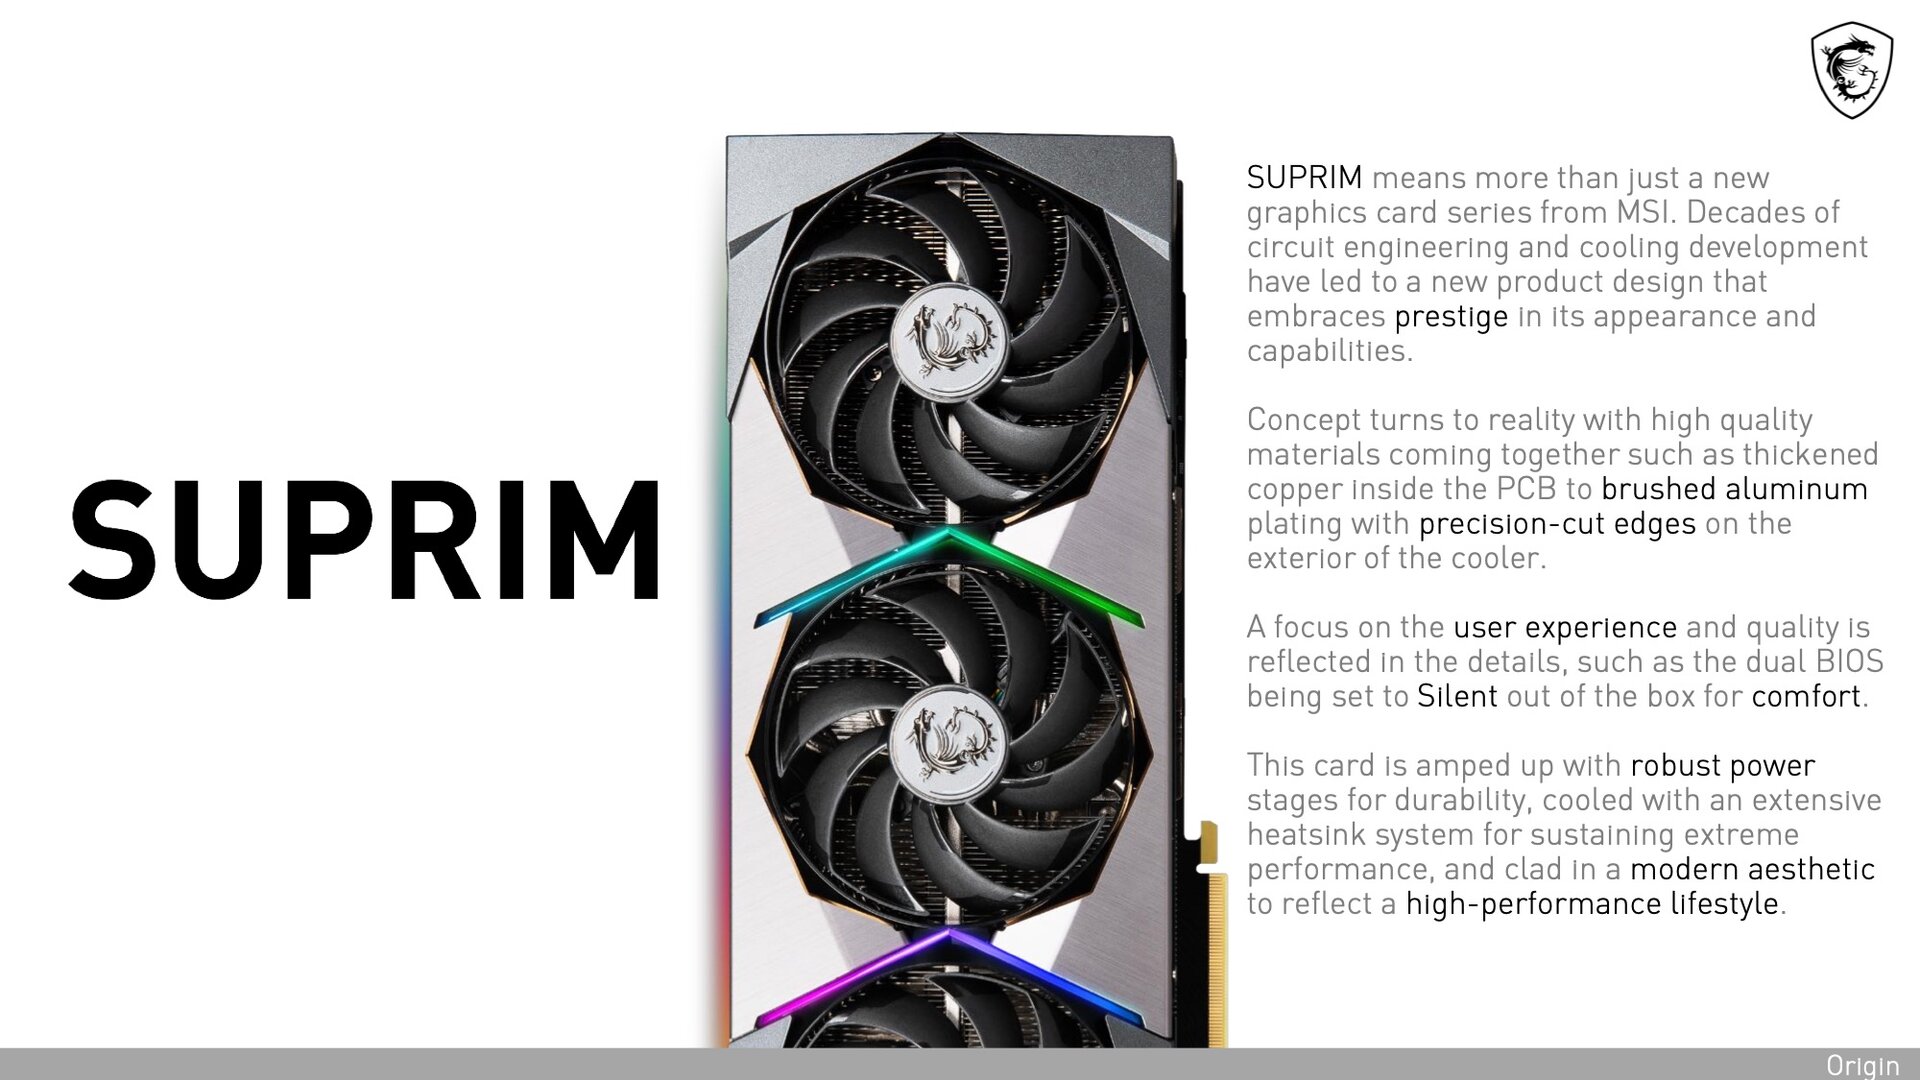 MSI's information material on the new Suprim series